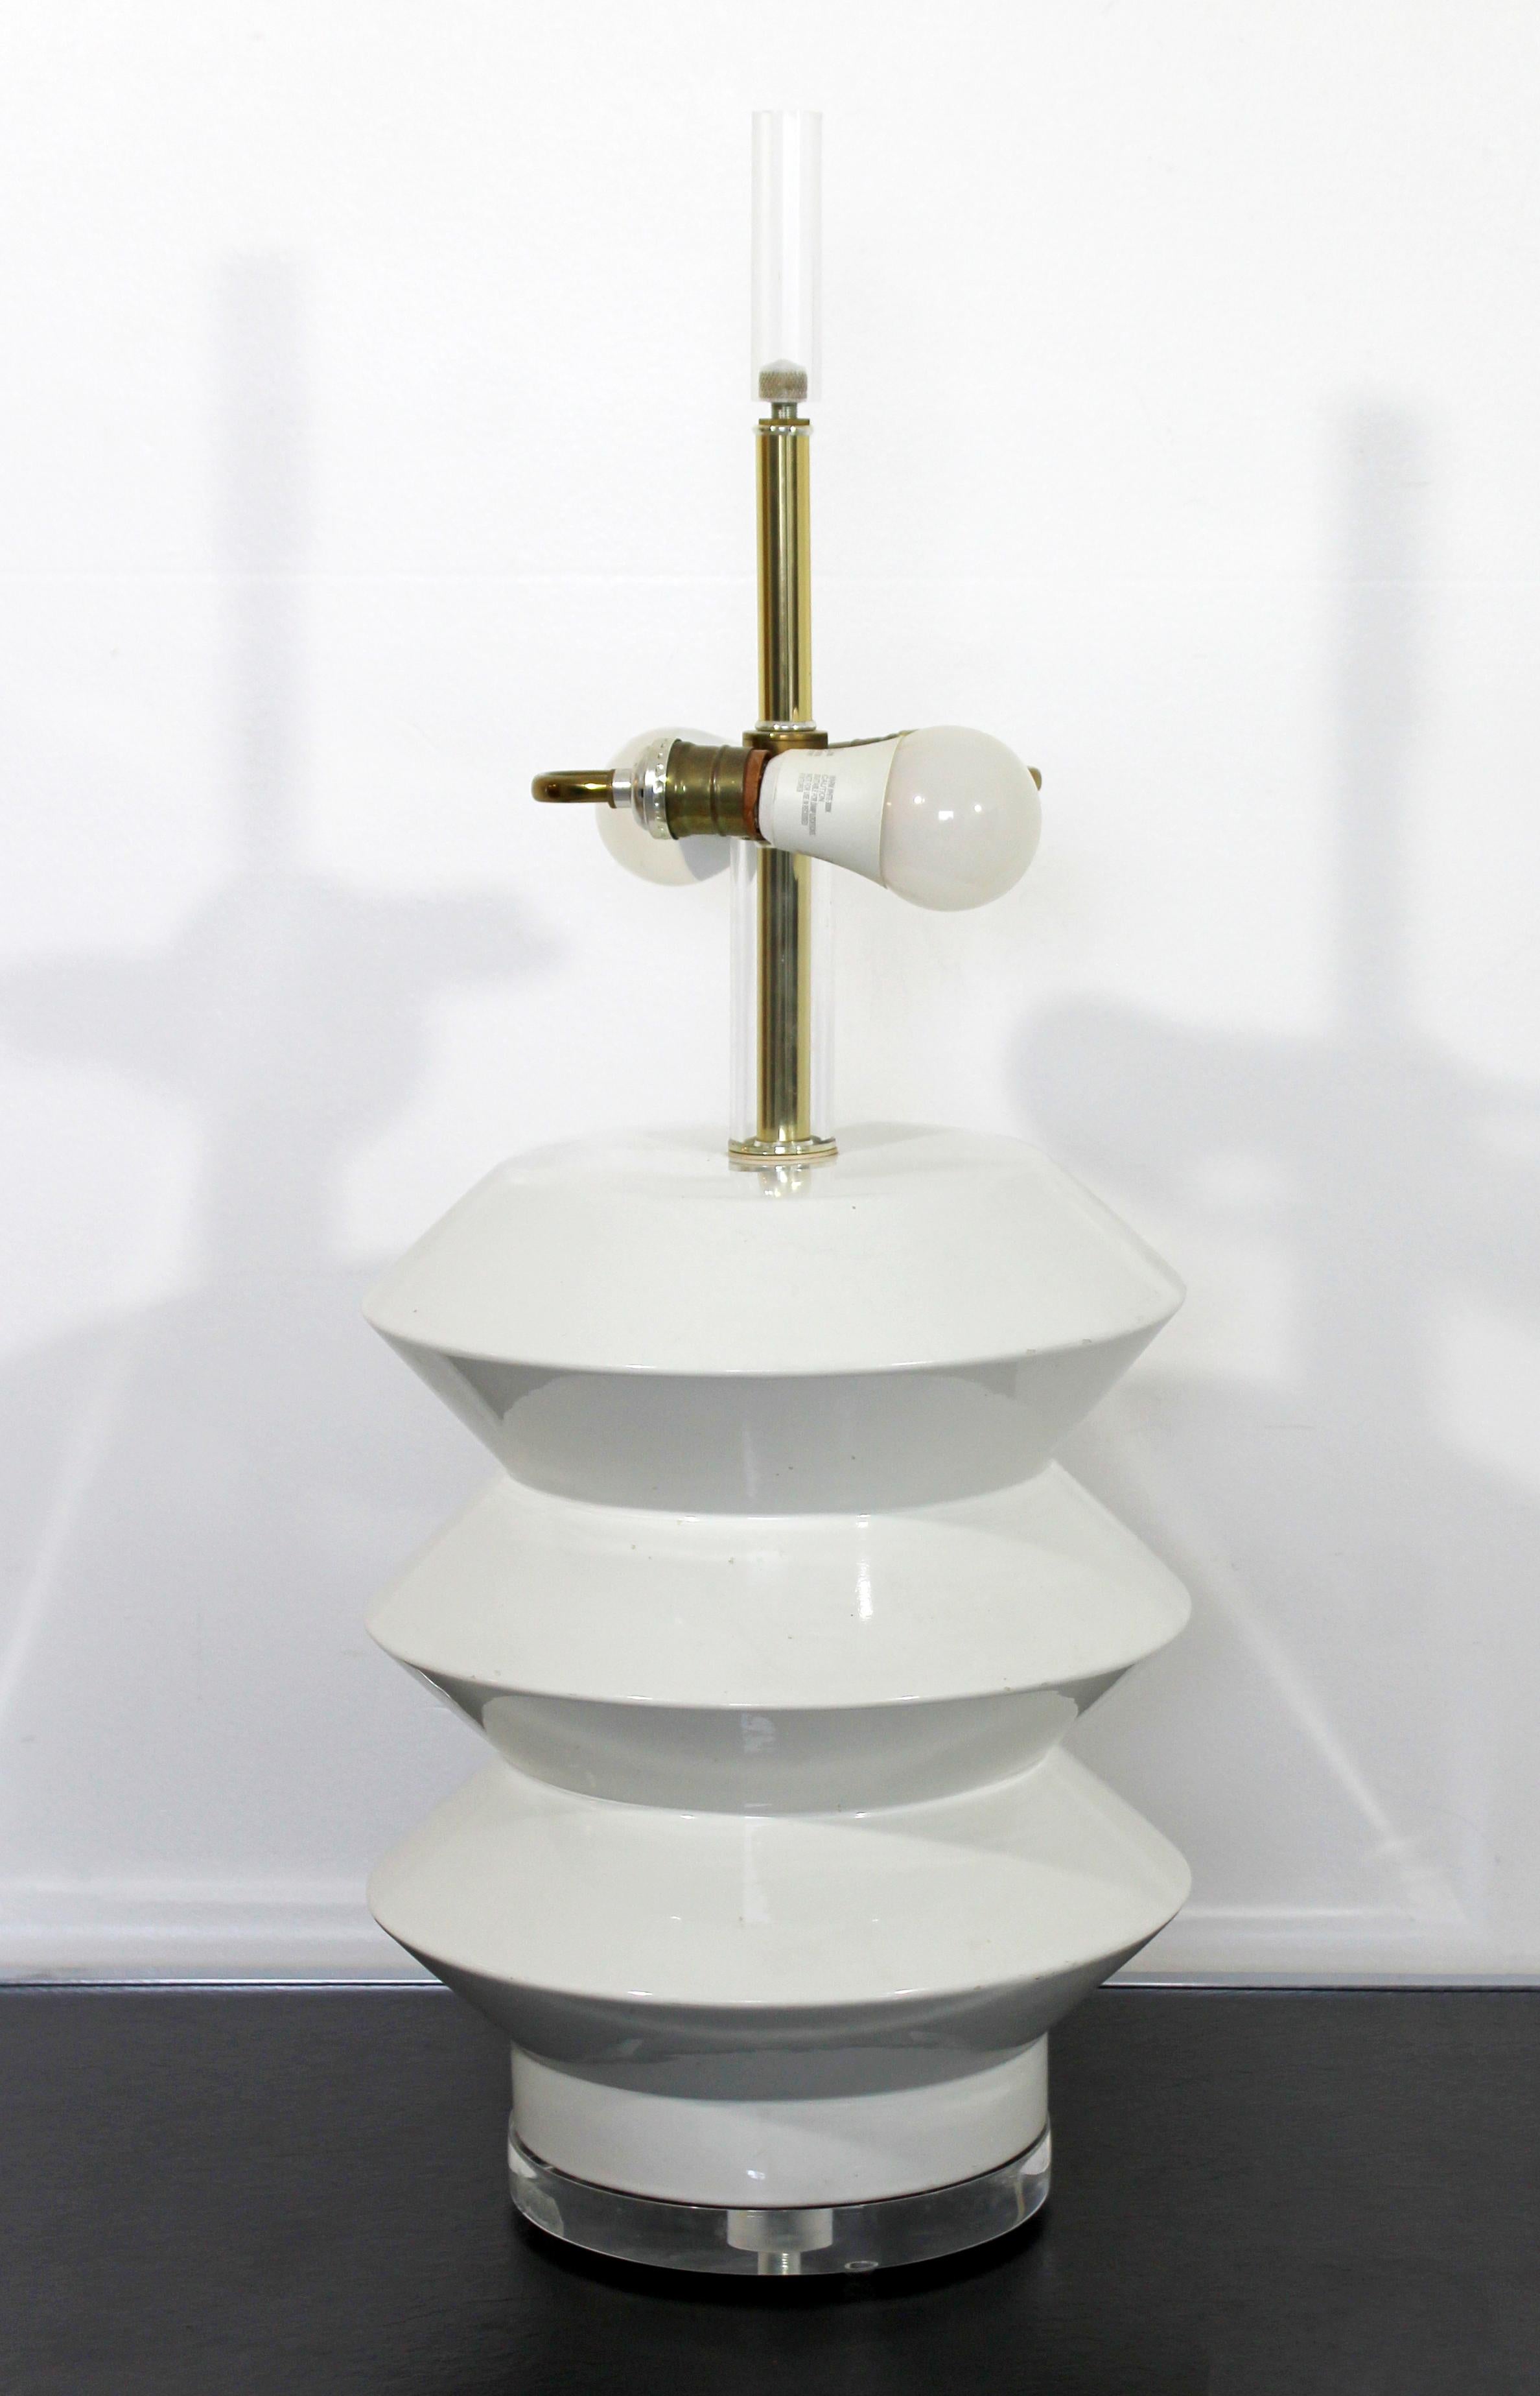 For your consideration is a phenomenal, architectural table lamp, made of white ceramic, brass and Lucite, by Bauer. In very good condition. The dimensions of the lamp are 12